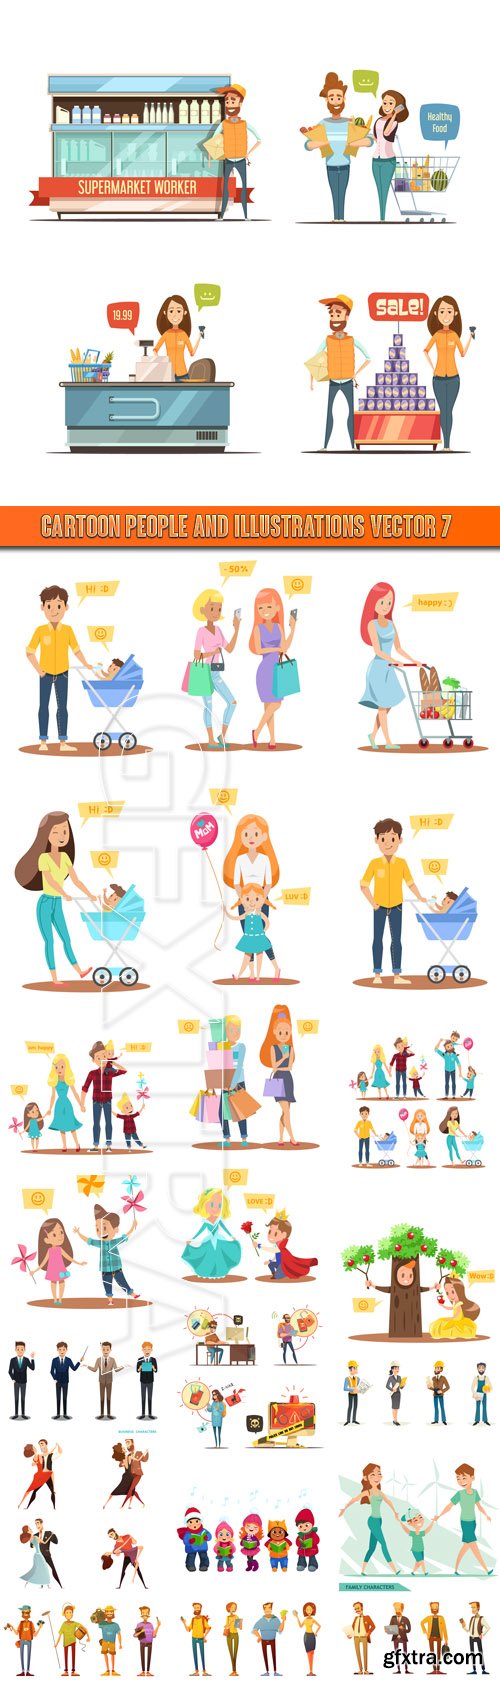 Cartoon people and Illustrations vector 7